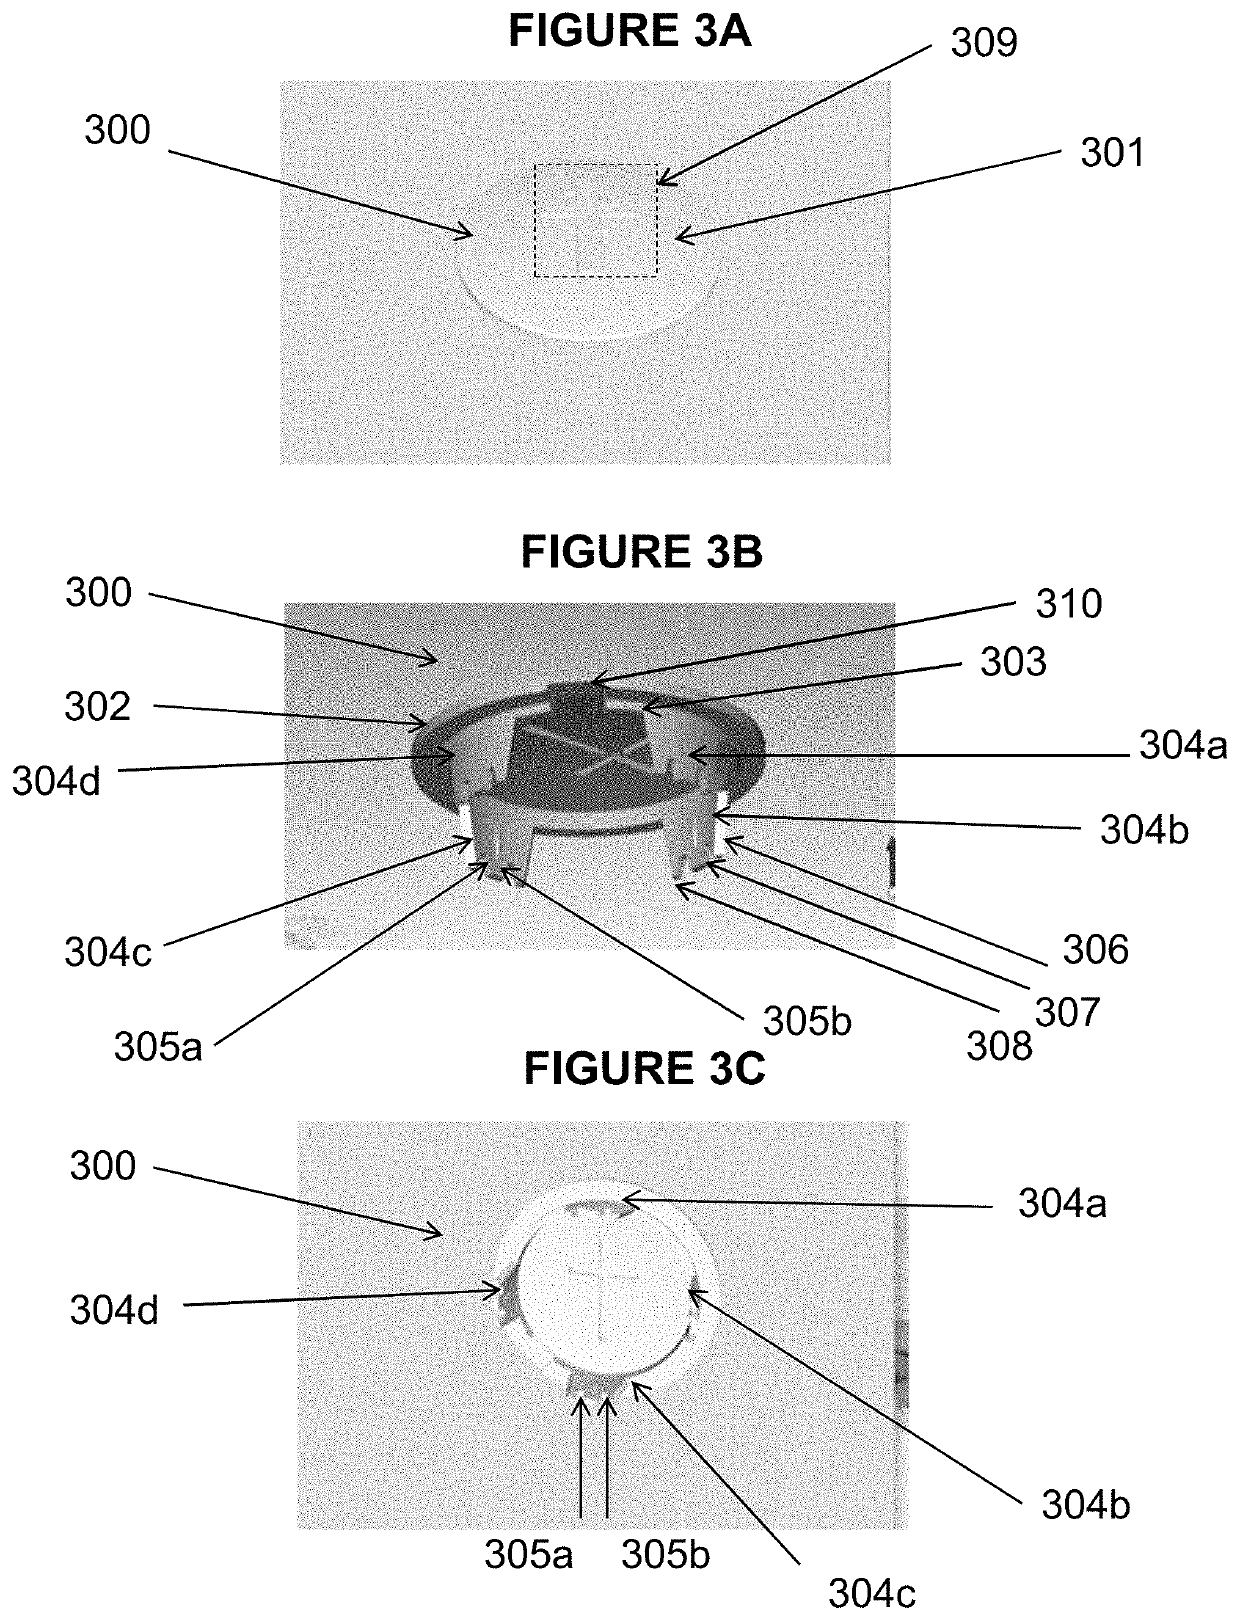 Monument cap device comprising a circular lid and an adhering structure